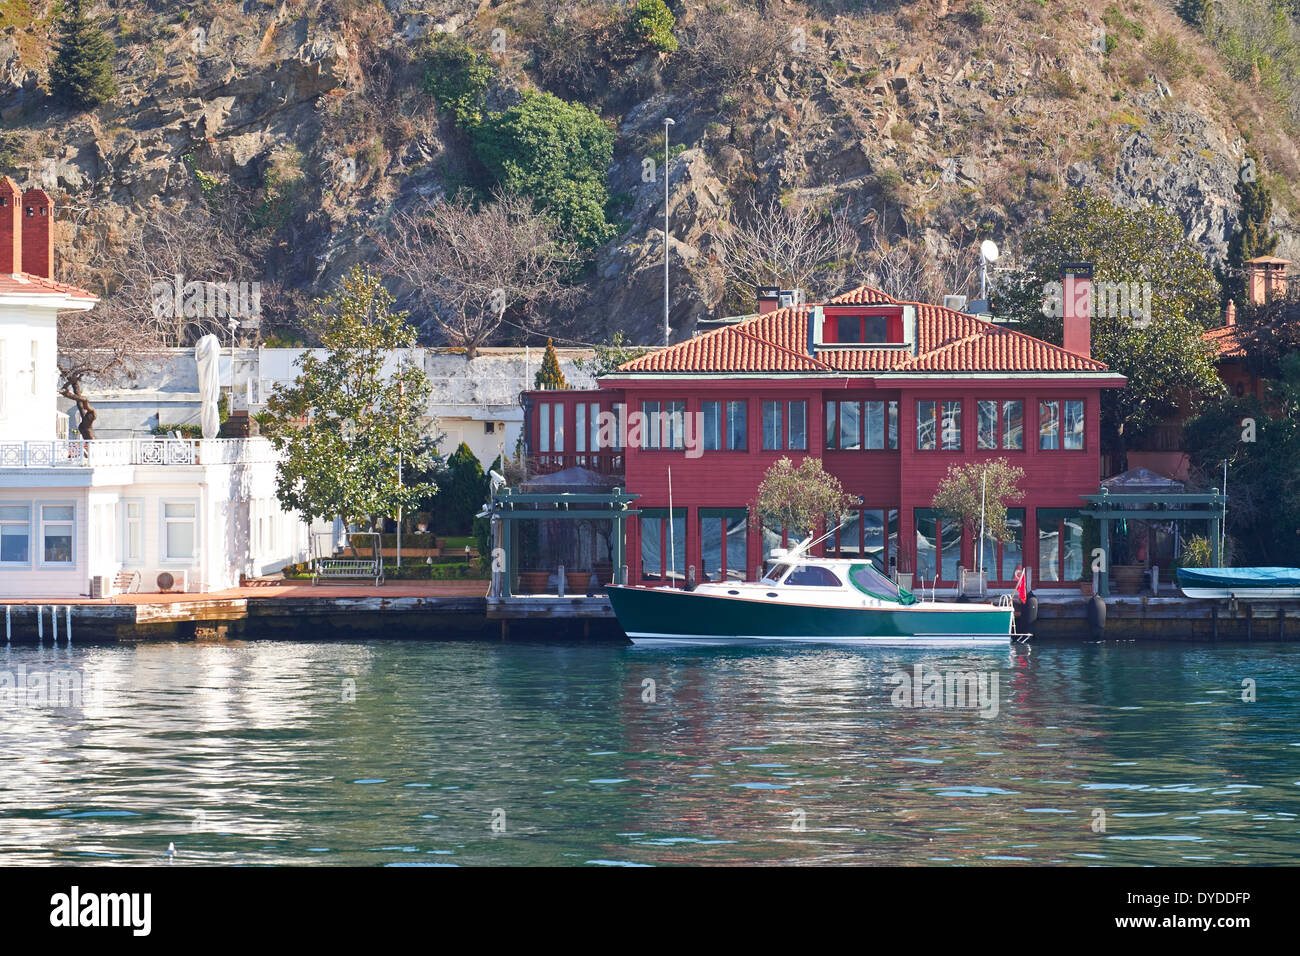 Architecture on the Bosphorus Strait. Restoration of wooden mansions, Istanbul in Turkey. Stock Photo